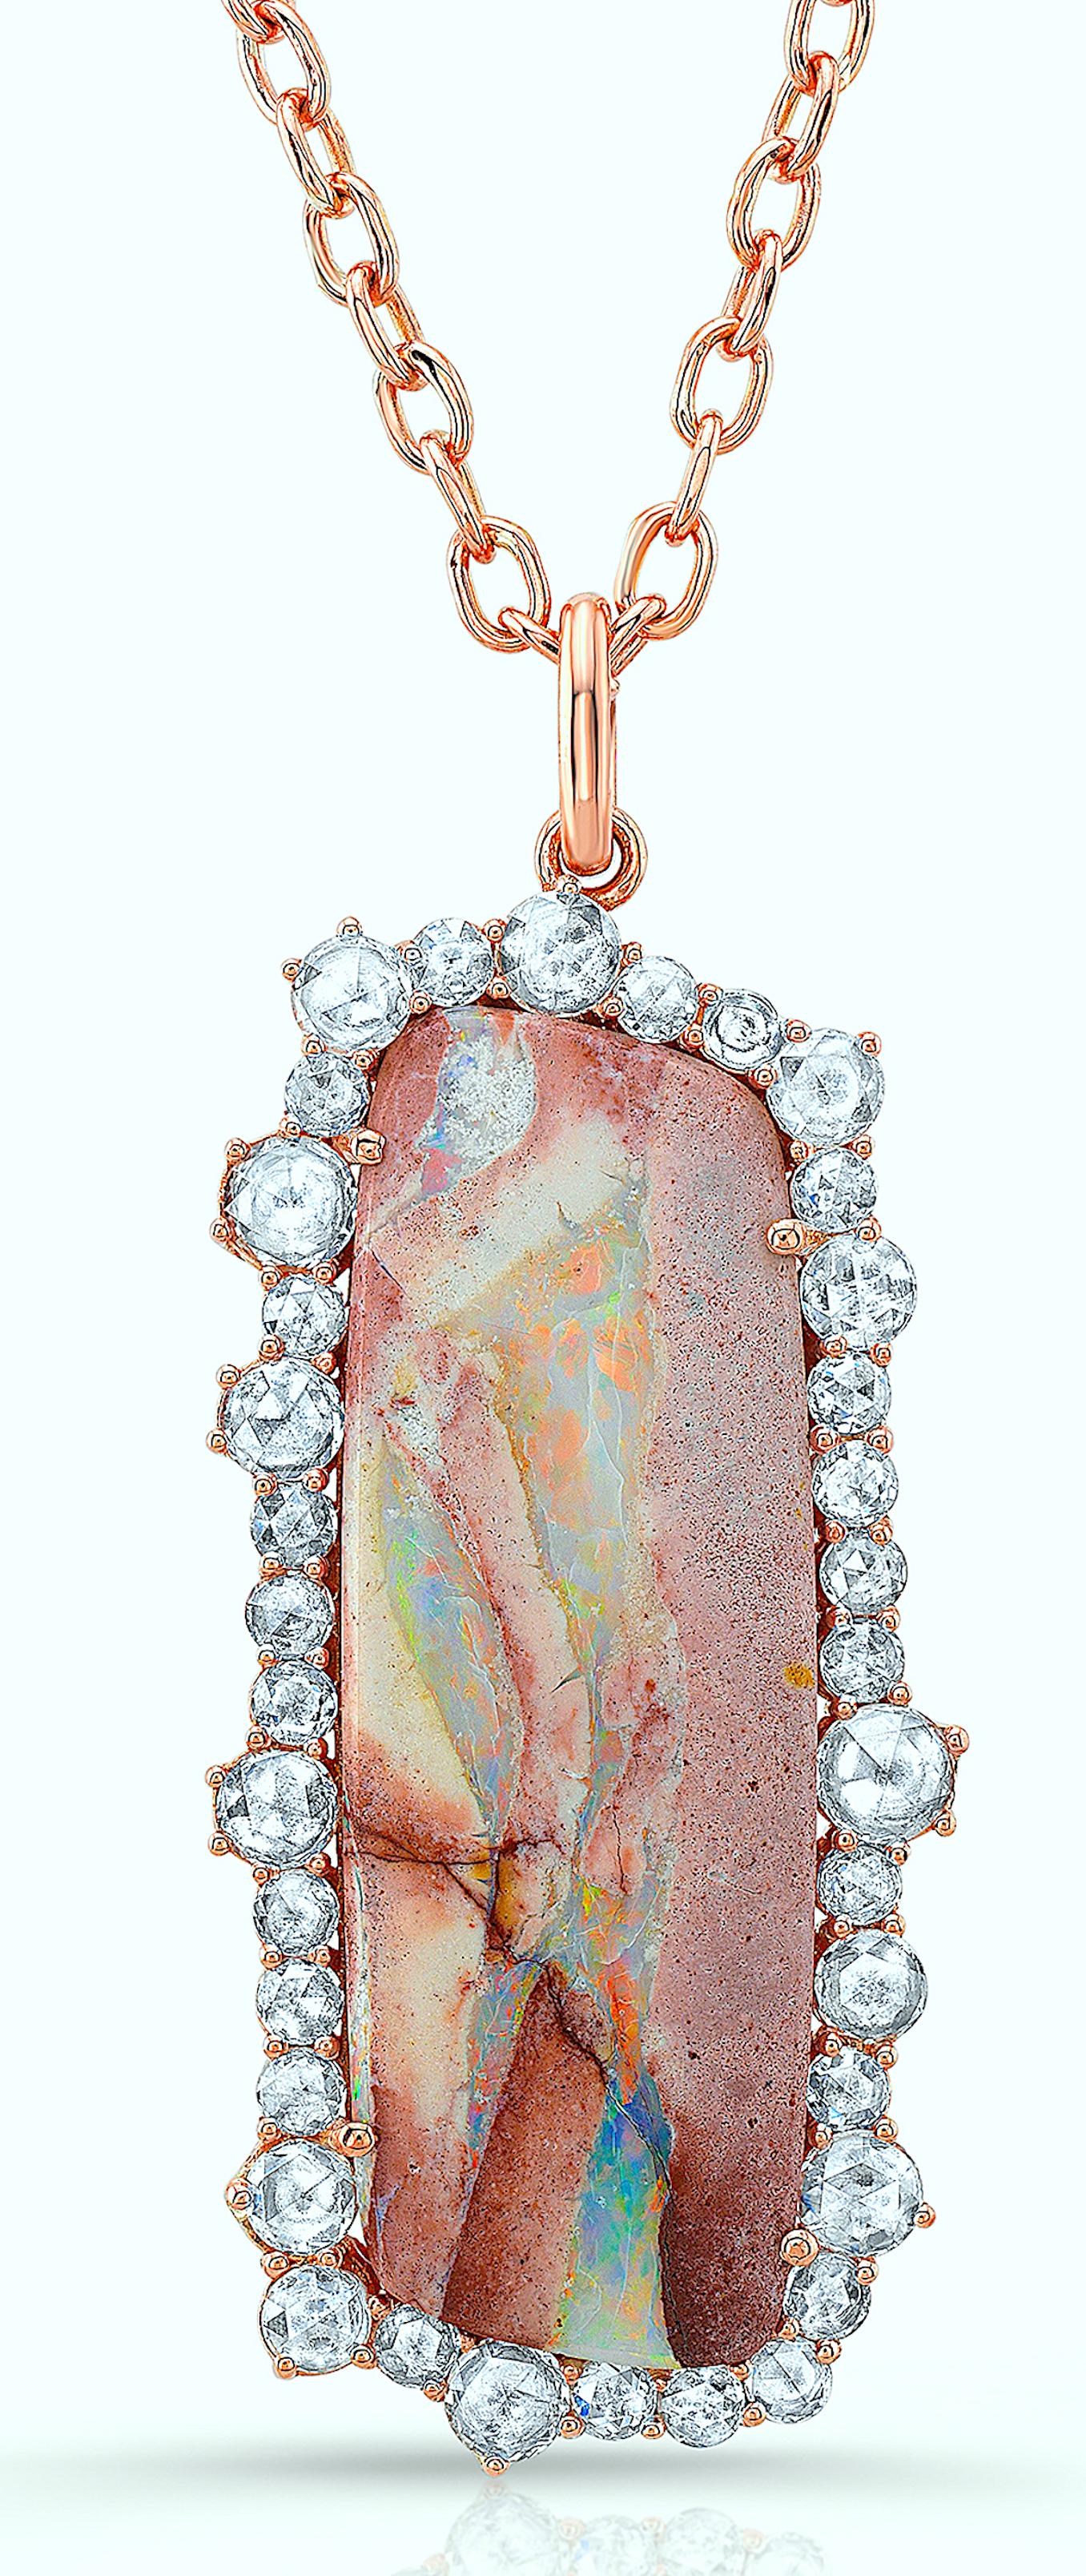 Amy Y's boulder opal and diamond contemporary pendant necklace is a one-of-a-kind piece for all occasions.  This primarily blue, hints of pink-colored boulder opal rest superbly in 18K-rose gold, impeccably surrounded by a single row of beautiful